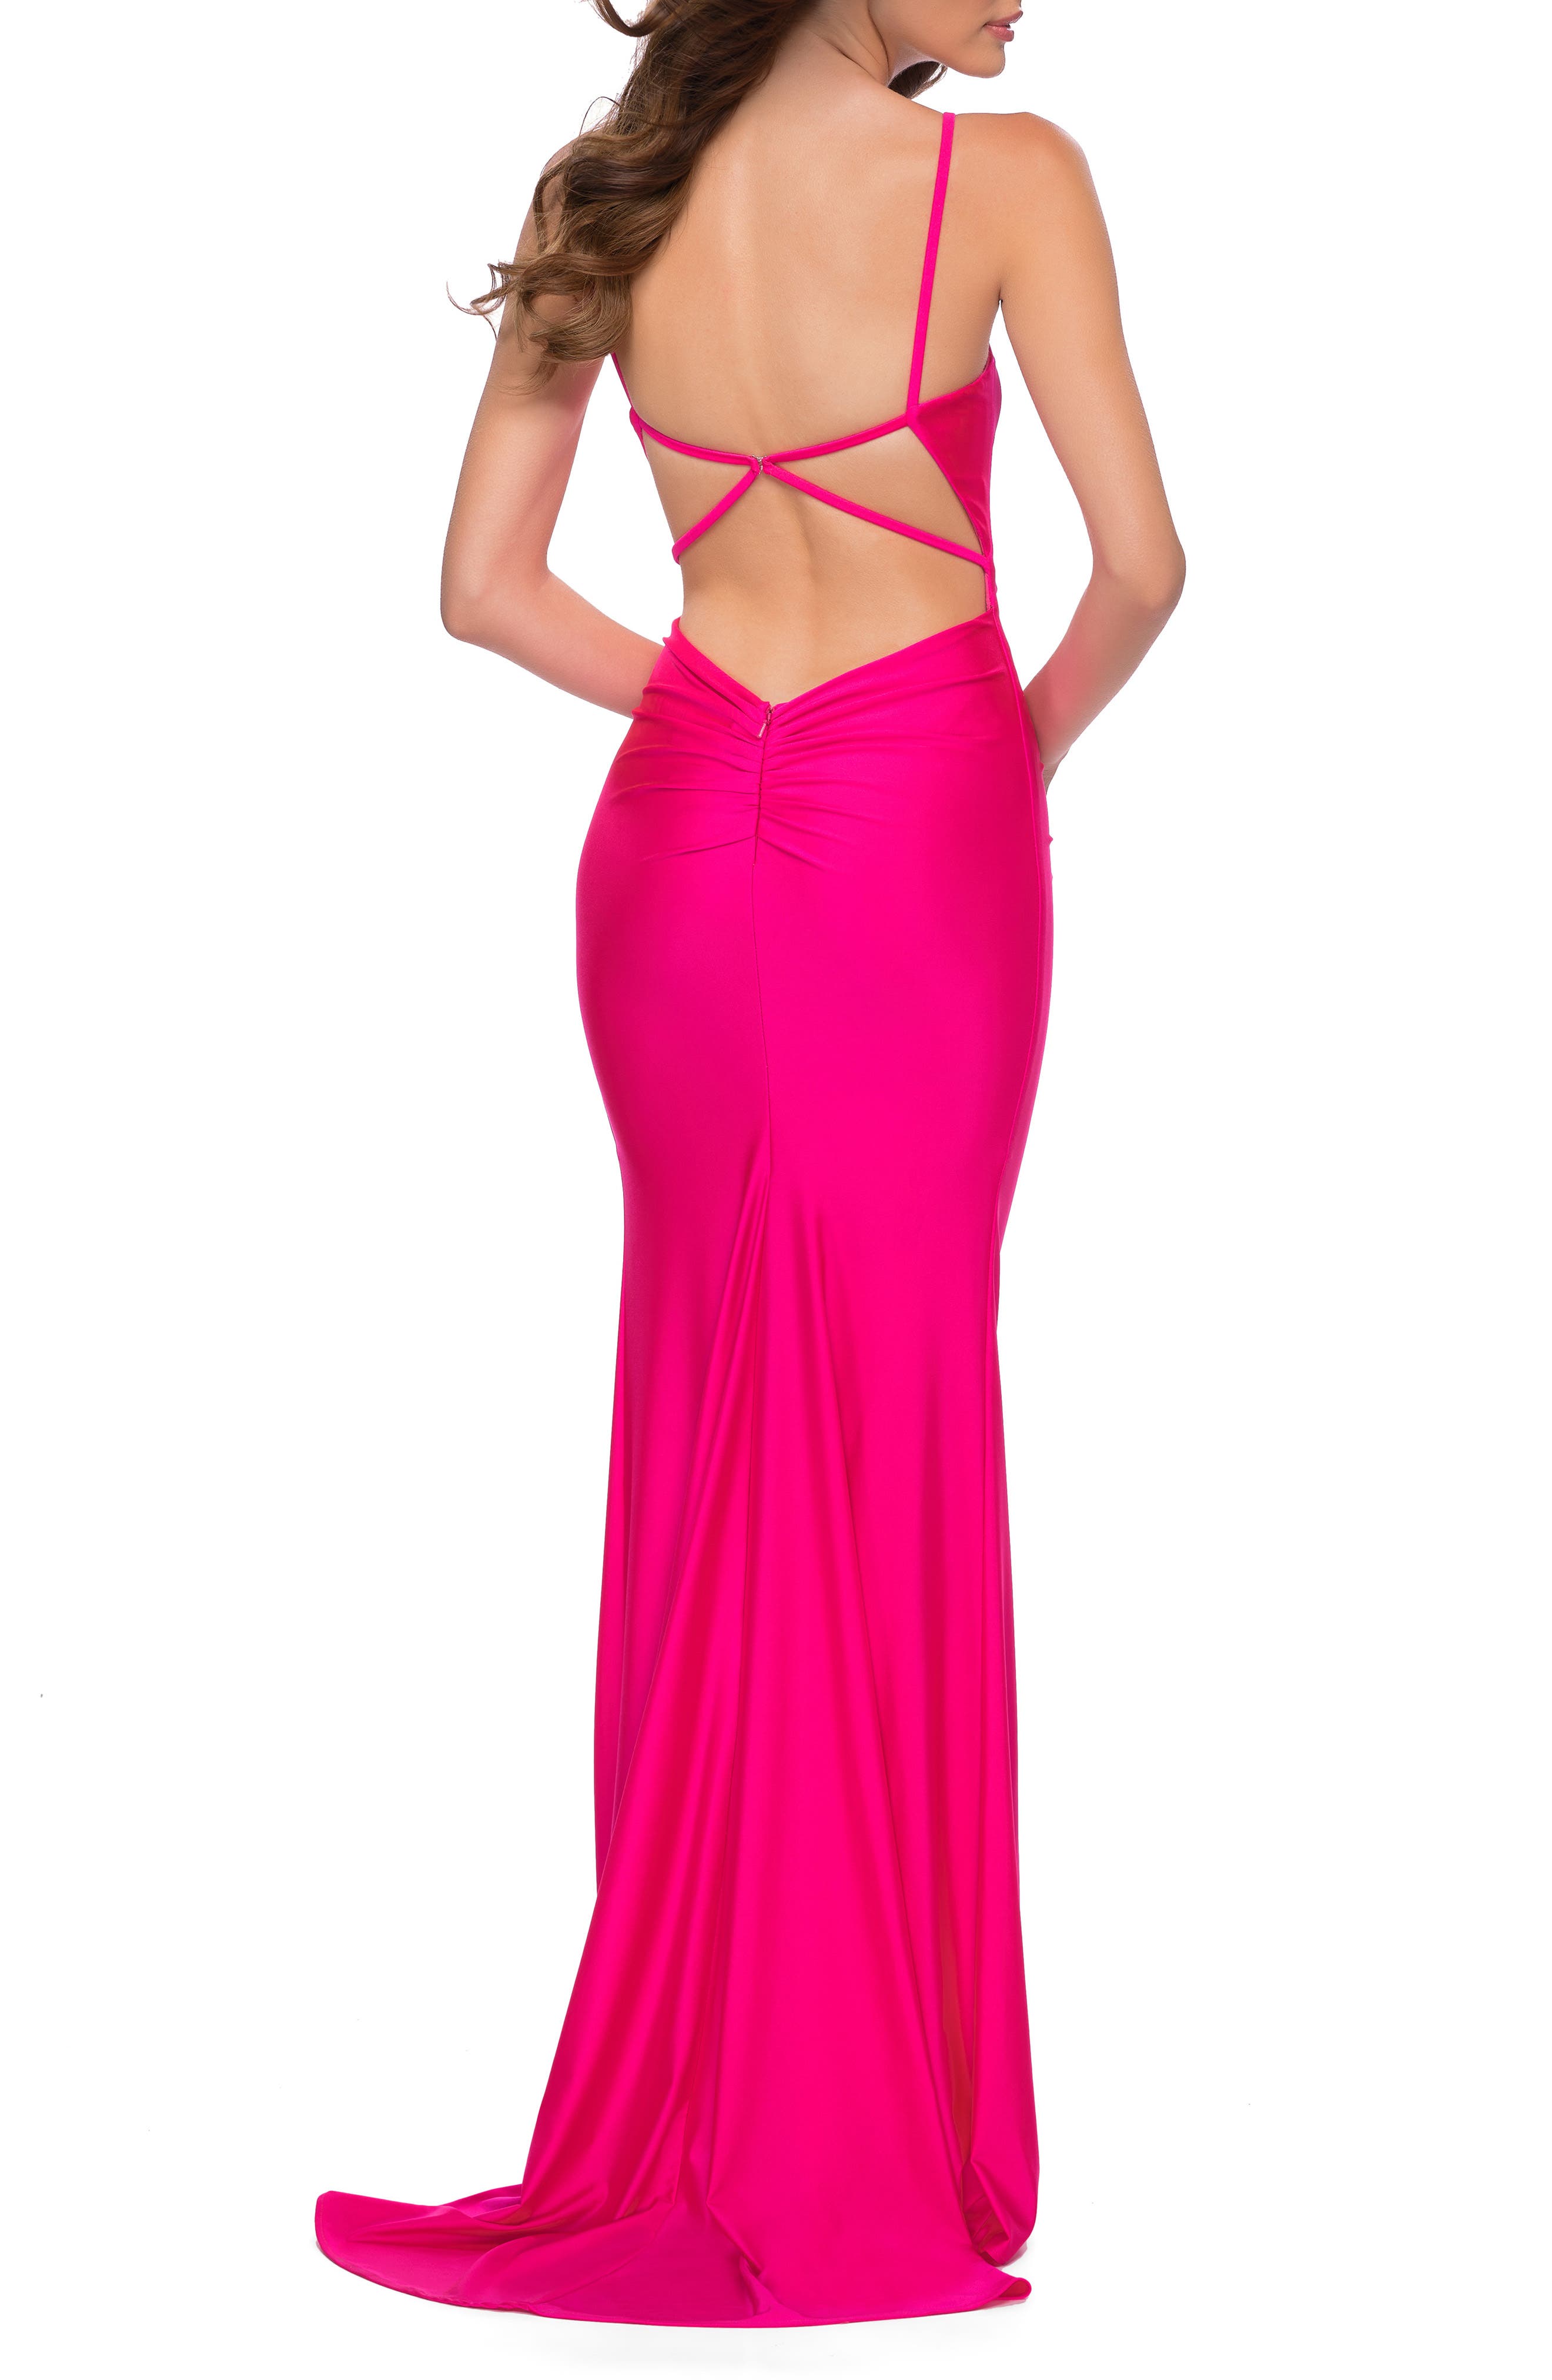 Le Femme Neon Pink Ruched Jersey Gown ...